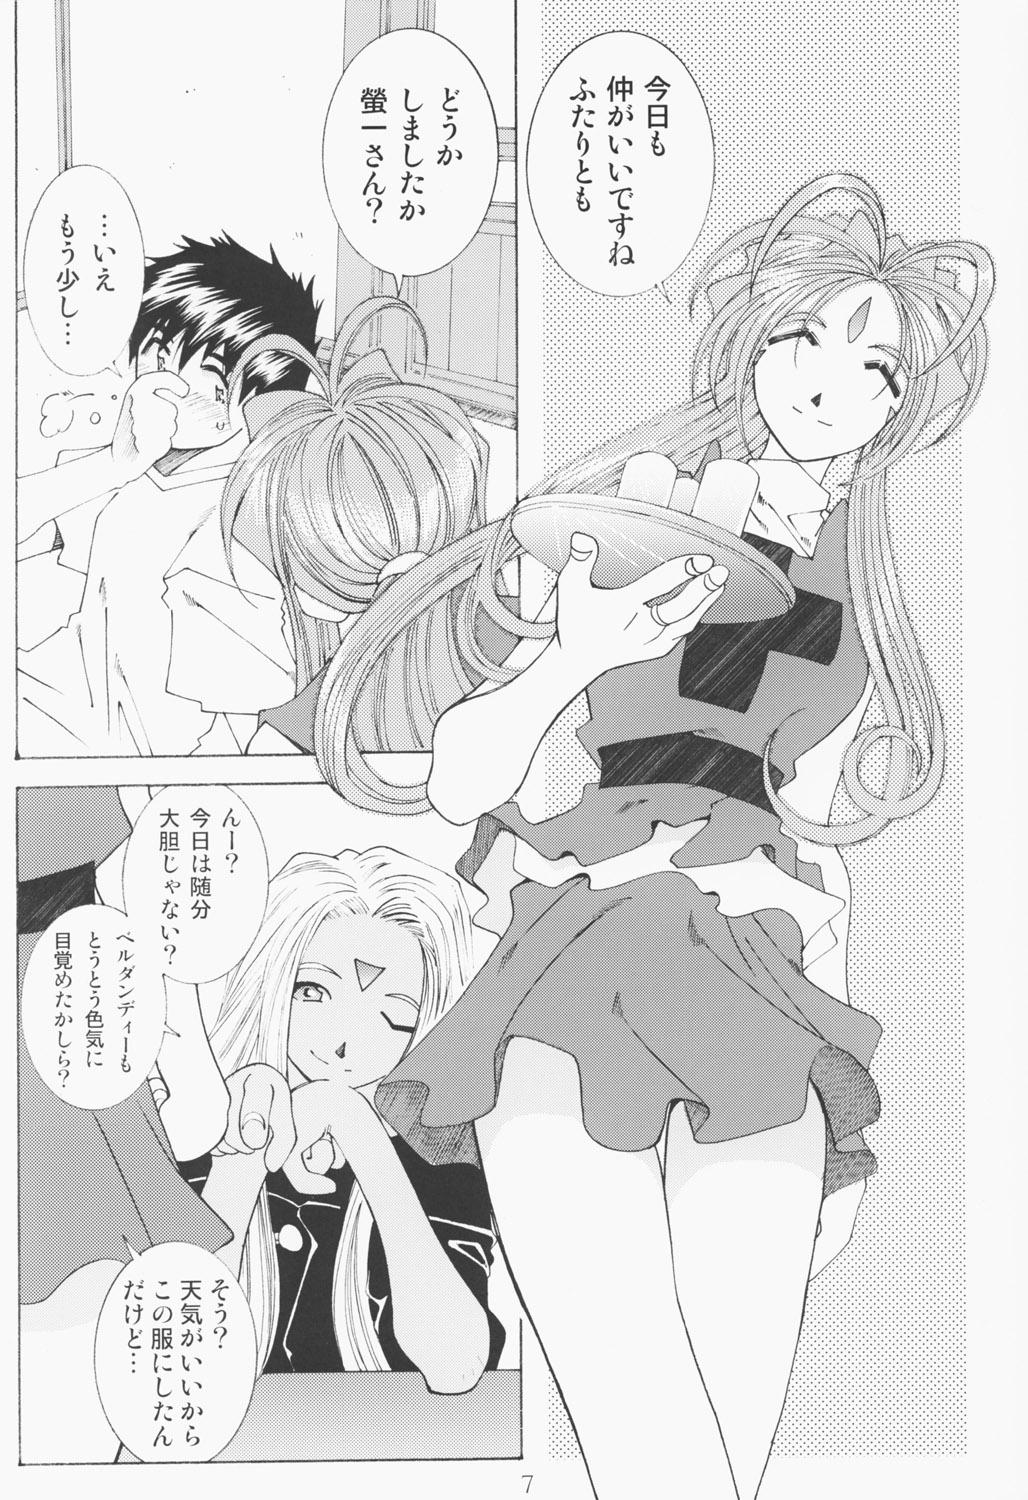 Weird (C63) [RPG COMPANY 2 (Toumi Haruka)] Candy Bell - Ah! My Goddess Outside-Story 2 (Ah! My Goddess) - Ah my goddess Fodendo - Page 6